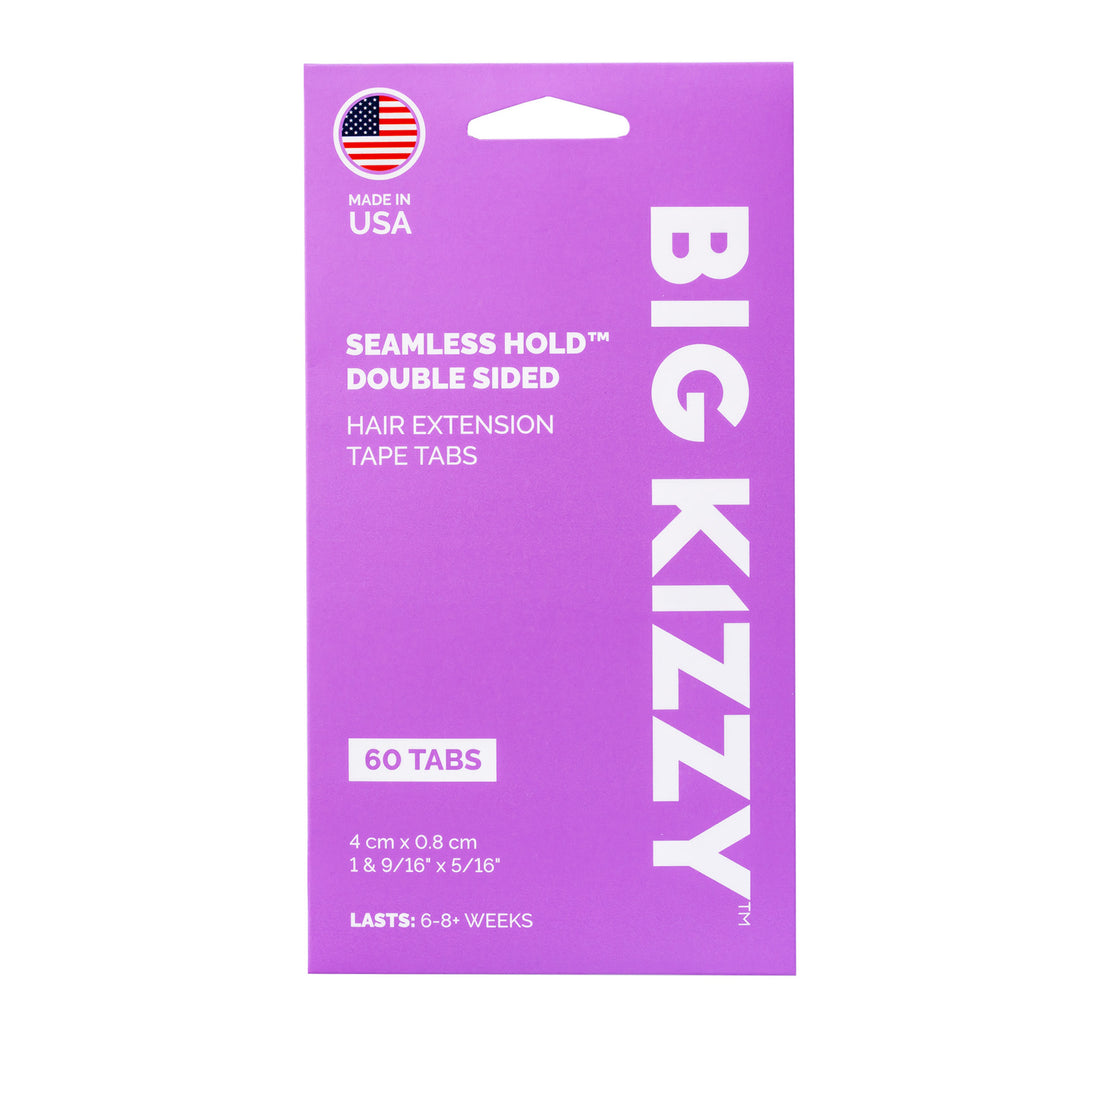 A pack of Big Kizzy® Seamless Hold Double Sided Hair Extension Replacement Tape Tabs, 60 tabs